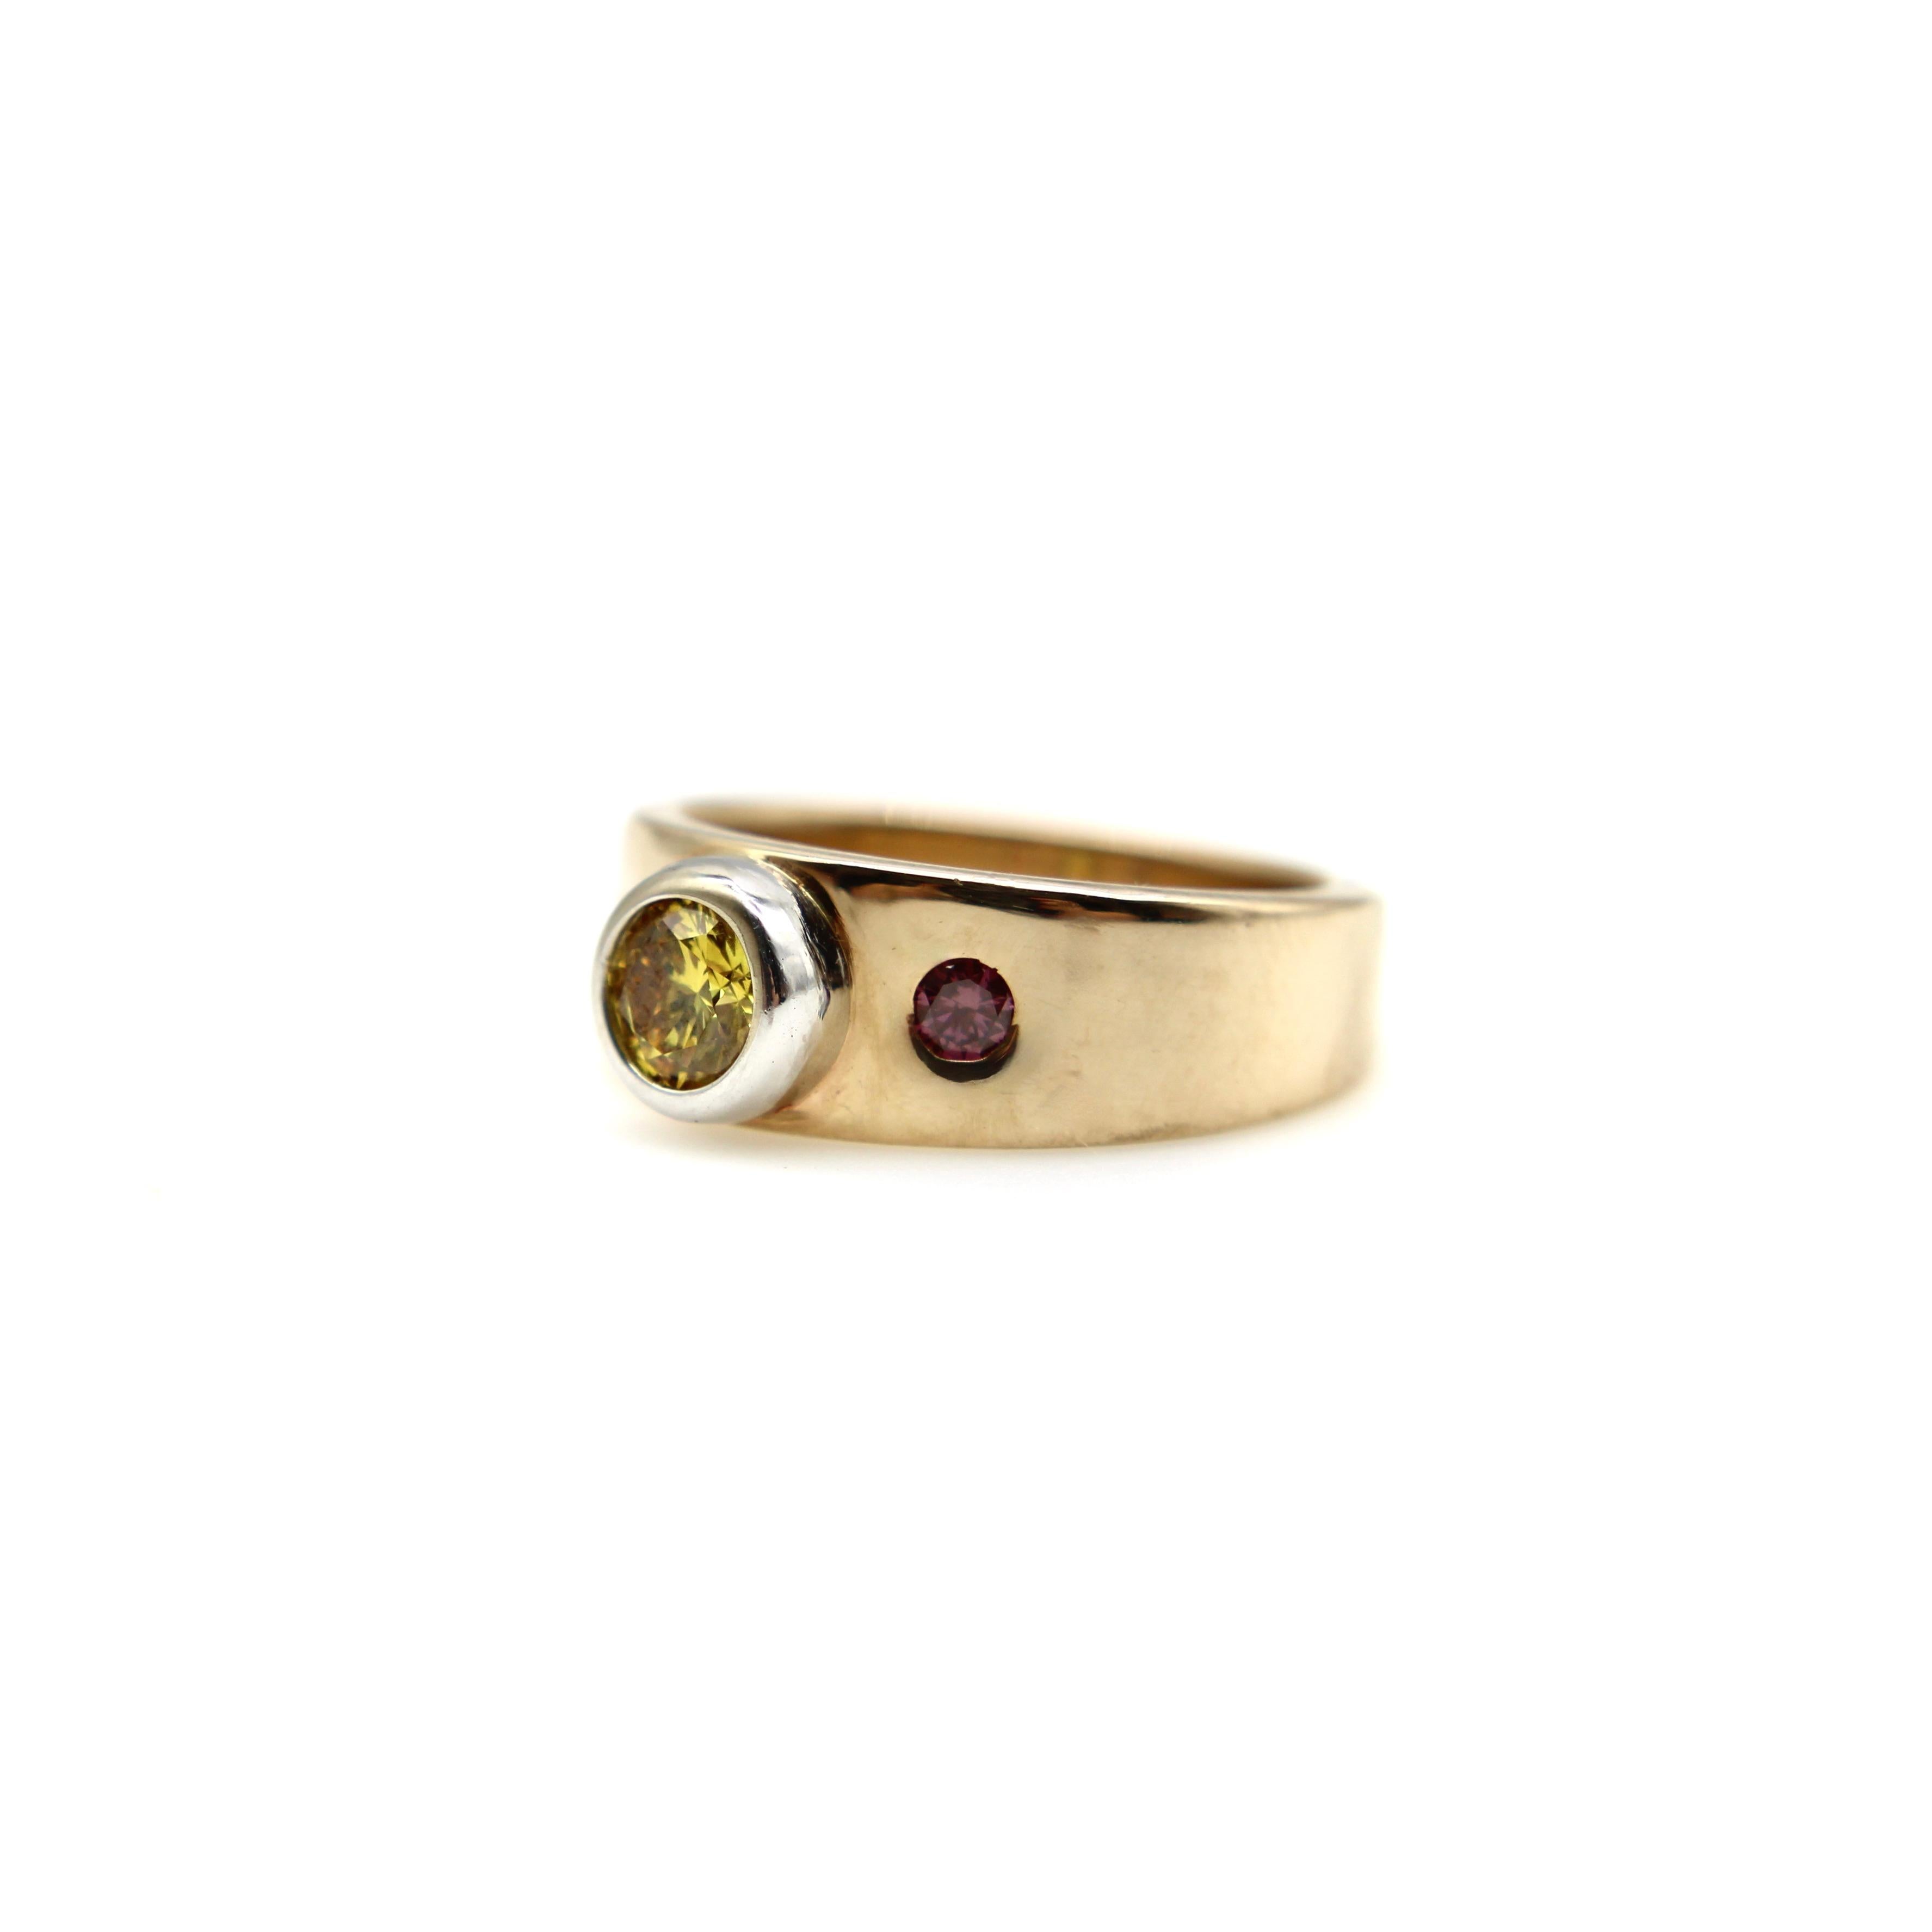 Brilliant Cut  14K Gold Fancy Yellow and Pink Diamond Ring by MWM Goldsmithing For Sale